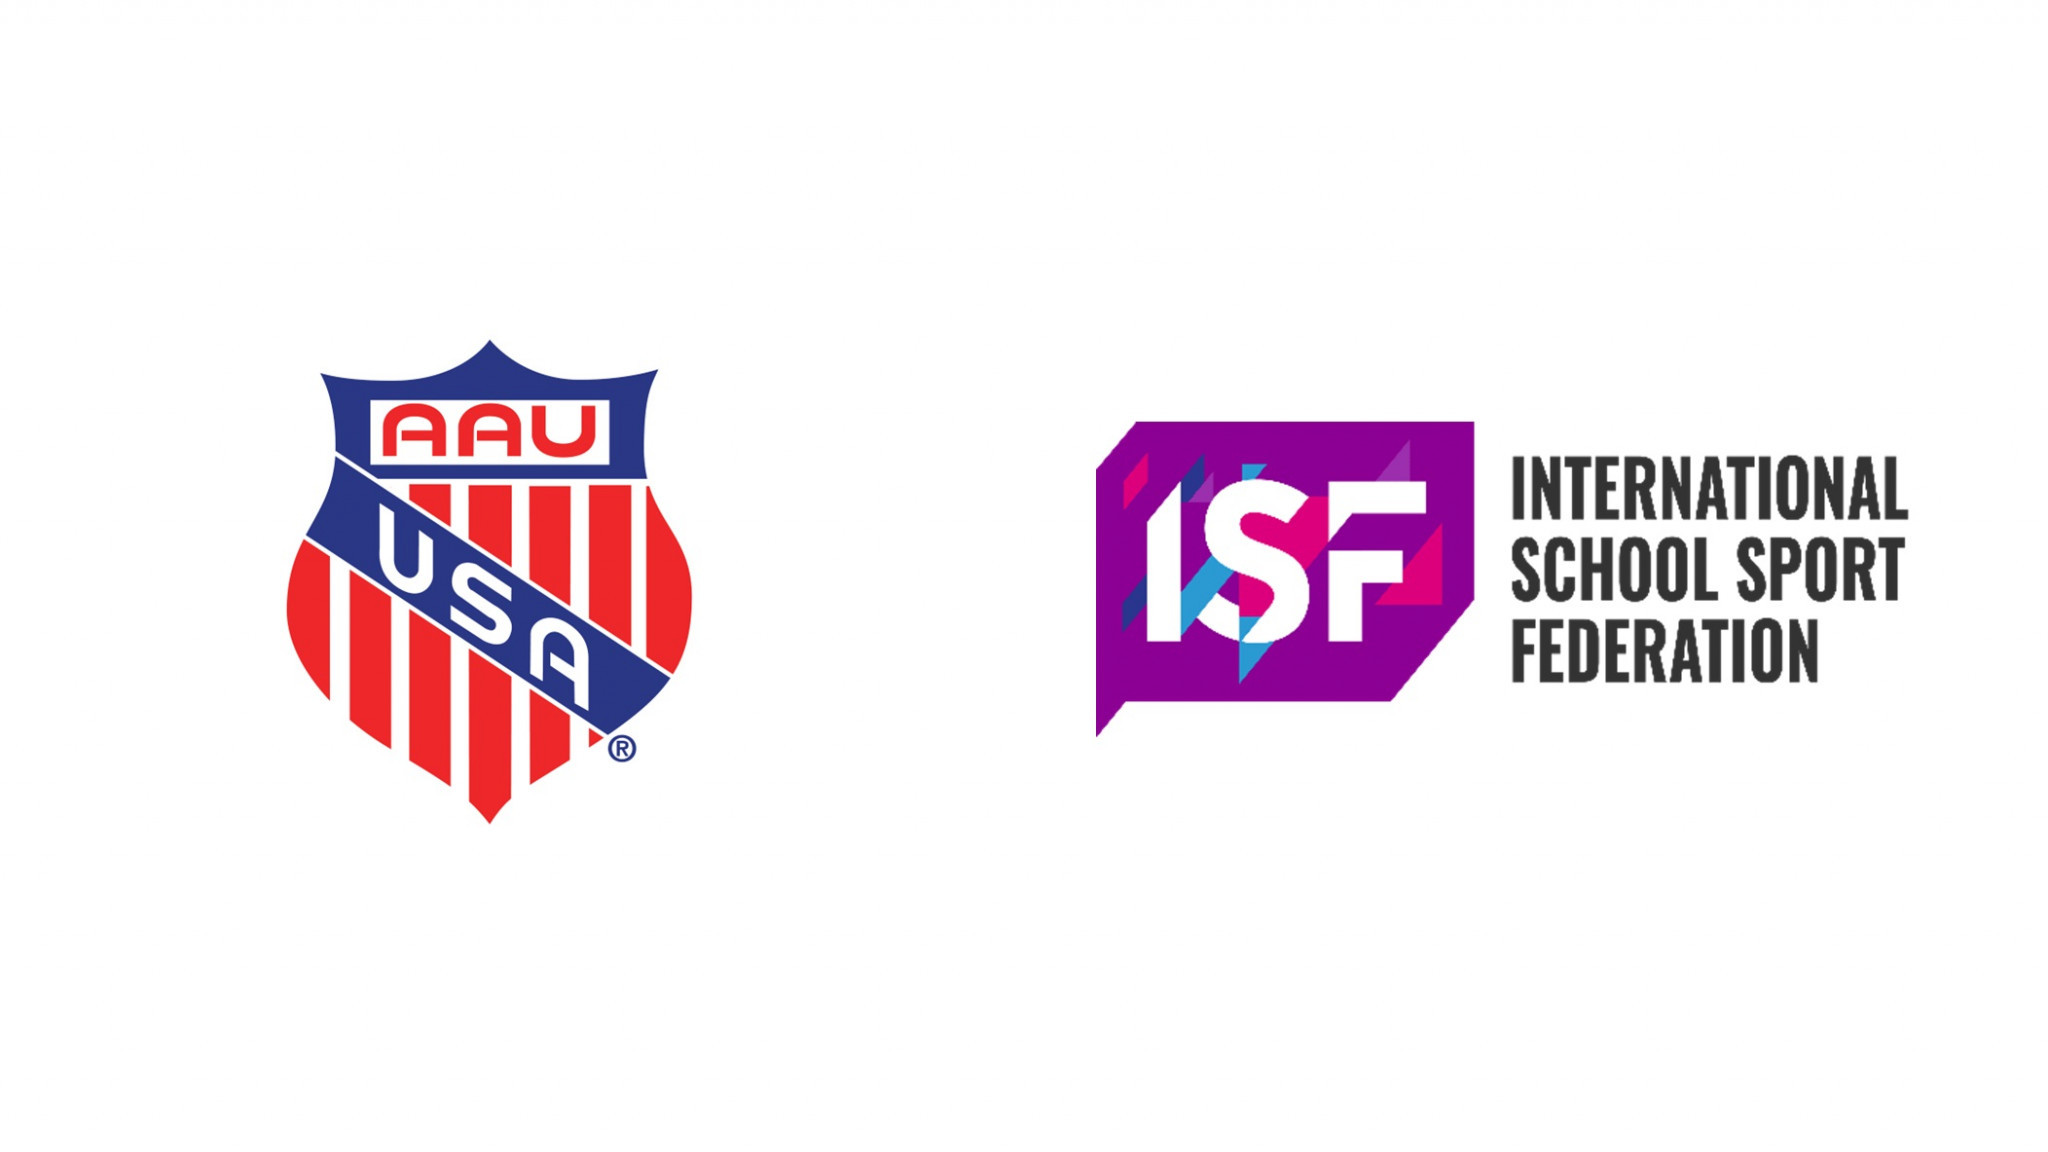 International School Sport Federation team up with AAU to bring new events to US